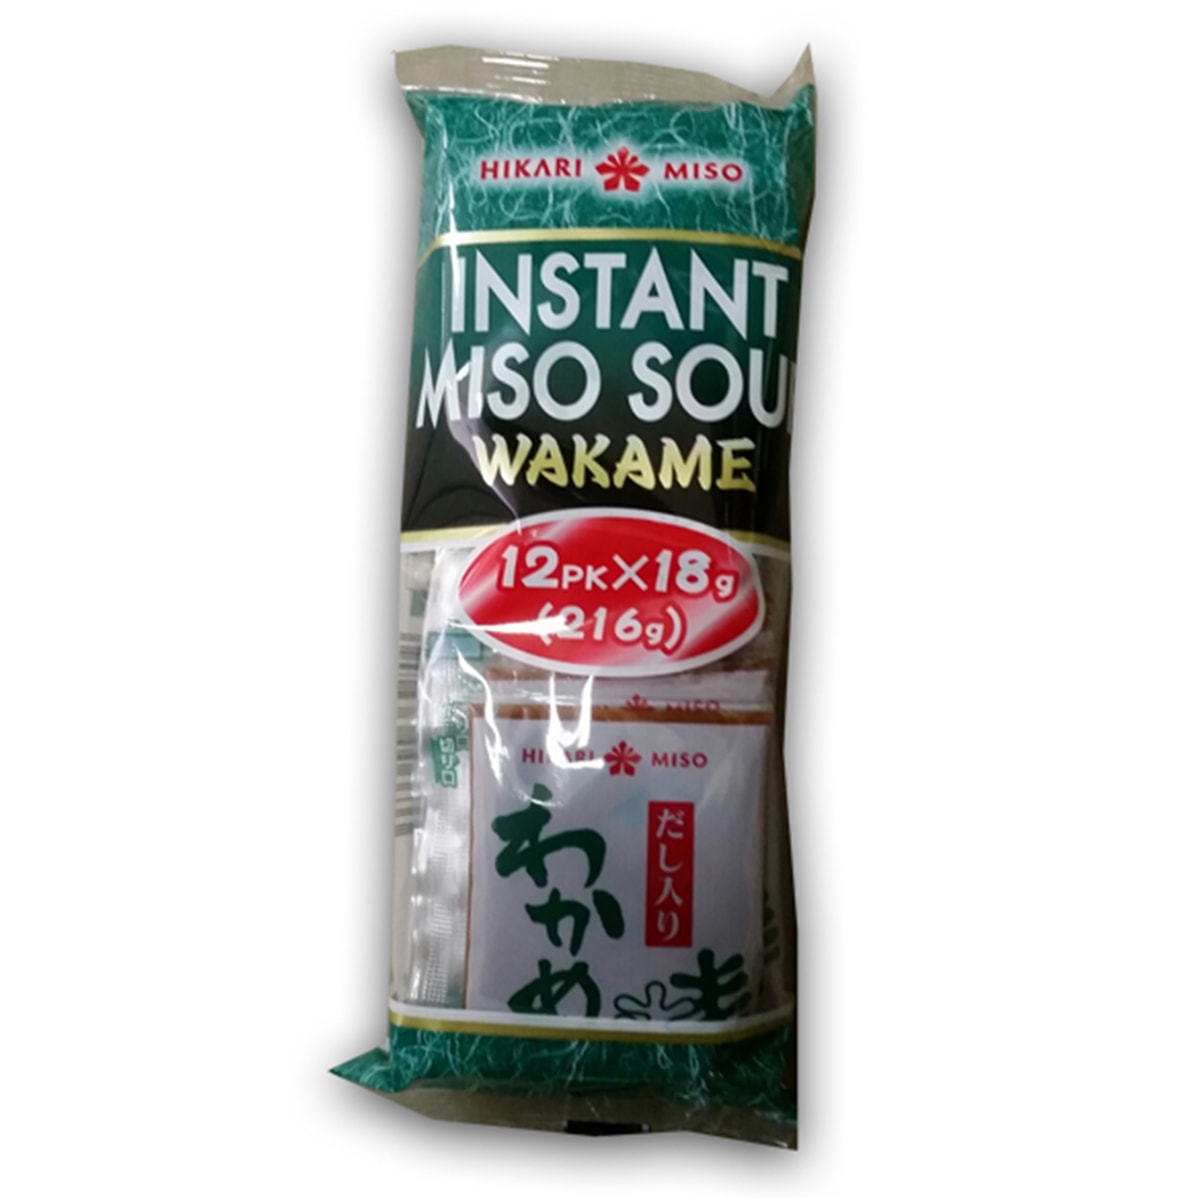 Buy Hikari Instant Miso Soup with Wakame - 216 gm